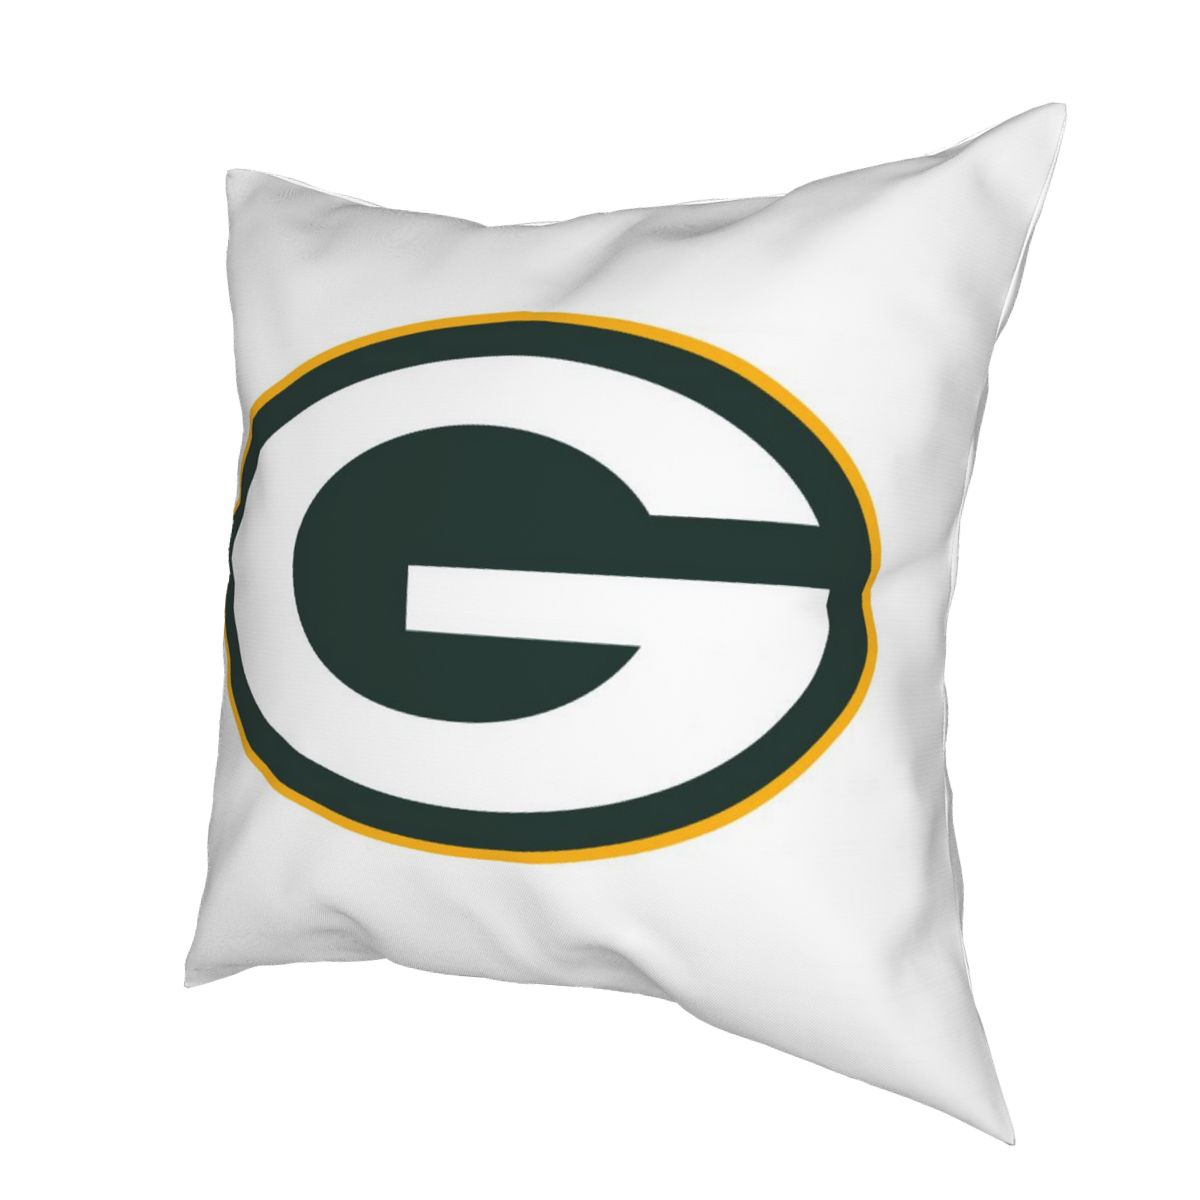 Custom Decorative Football Pillow Case Green Bay Packers White Pillowcase Personalized Throw Pillow Covers